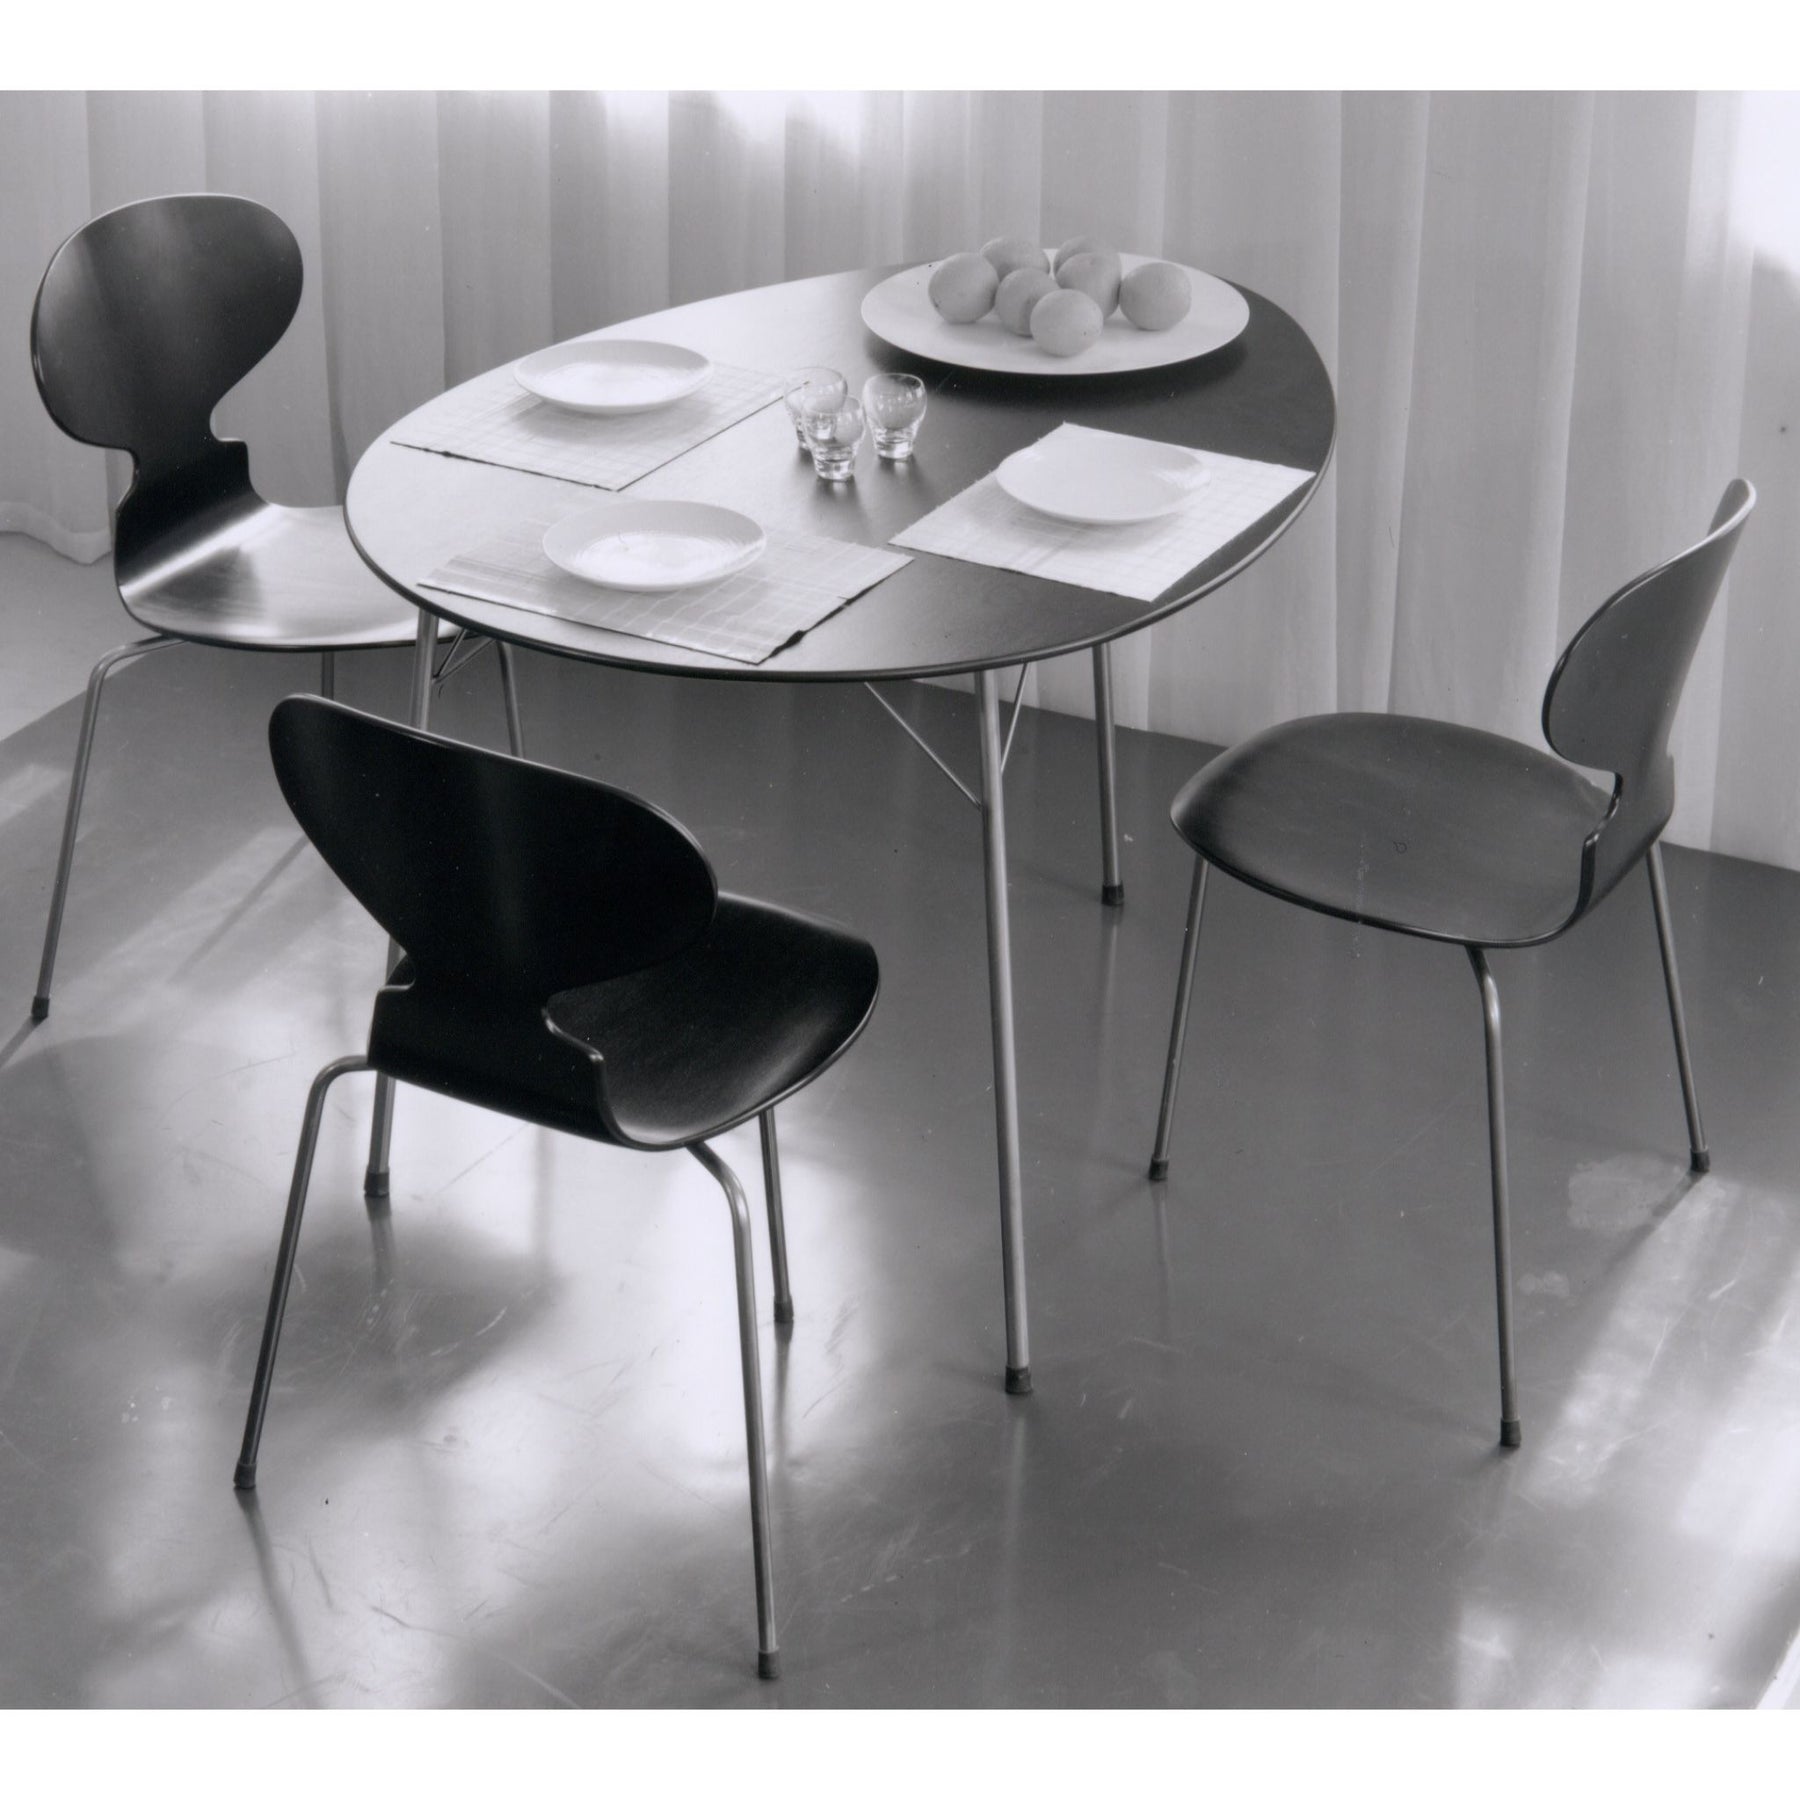 Fritz Hansen Egg Table and Ant Chairs in Kitchen Archival Photo from 1952